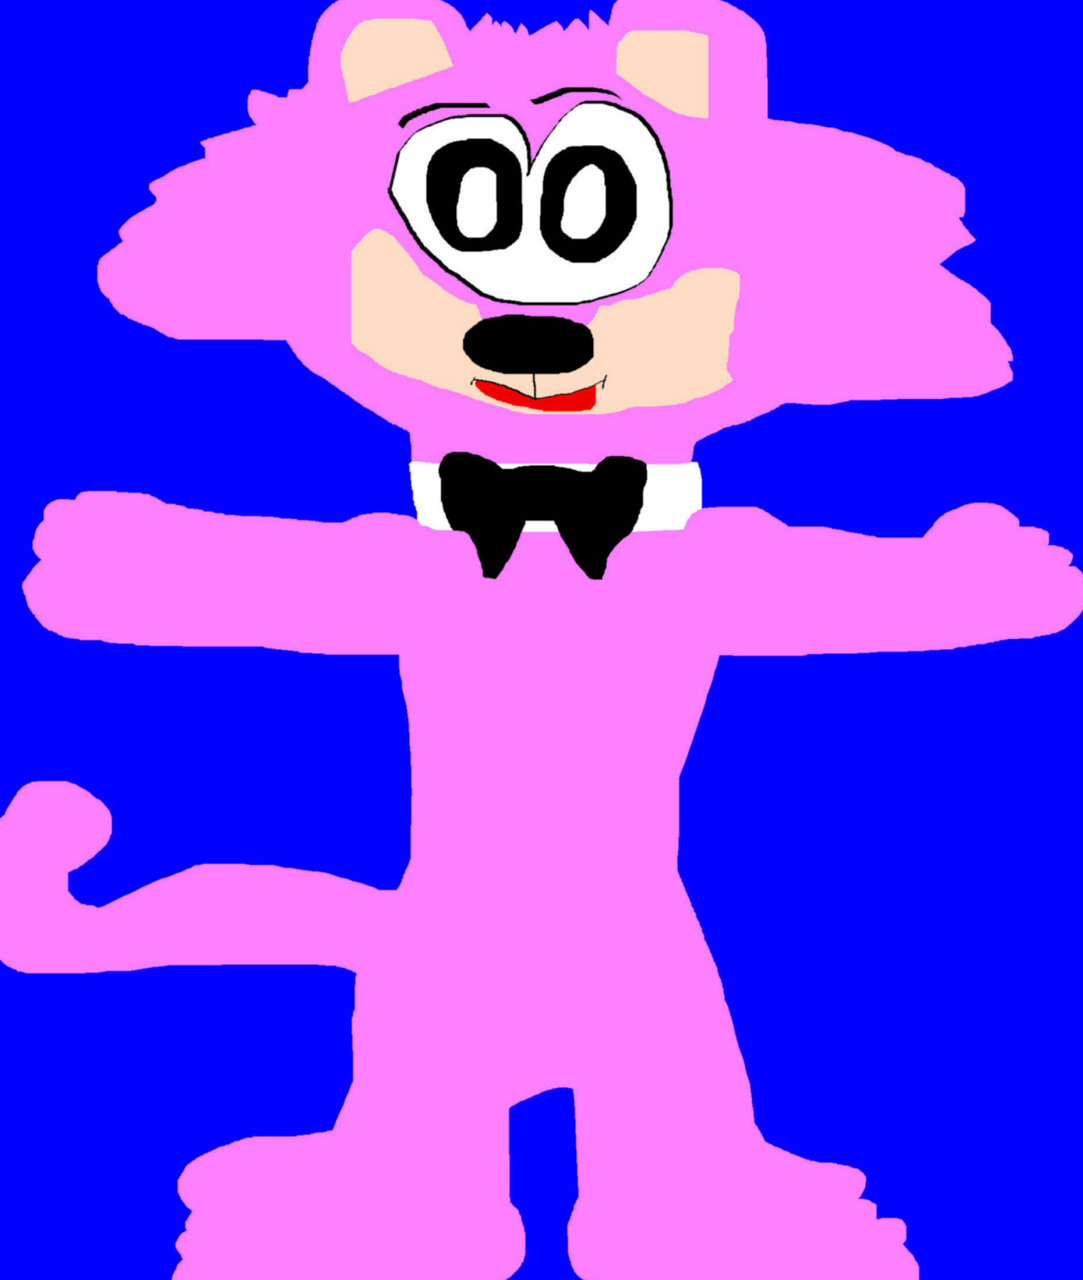 A Somewhat Buff Snagglepuss MS Paint by Falconlobo